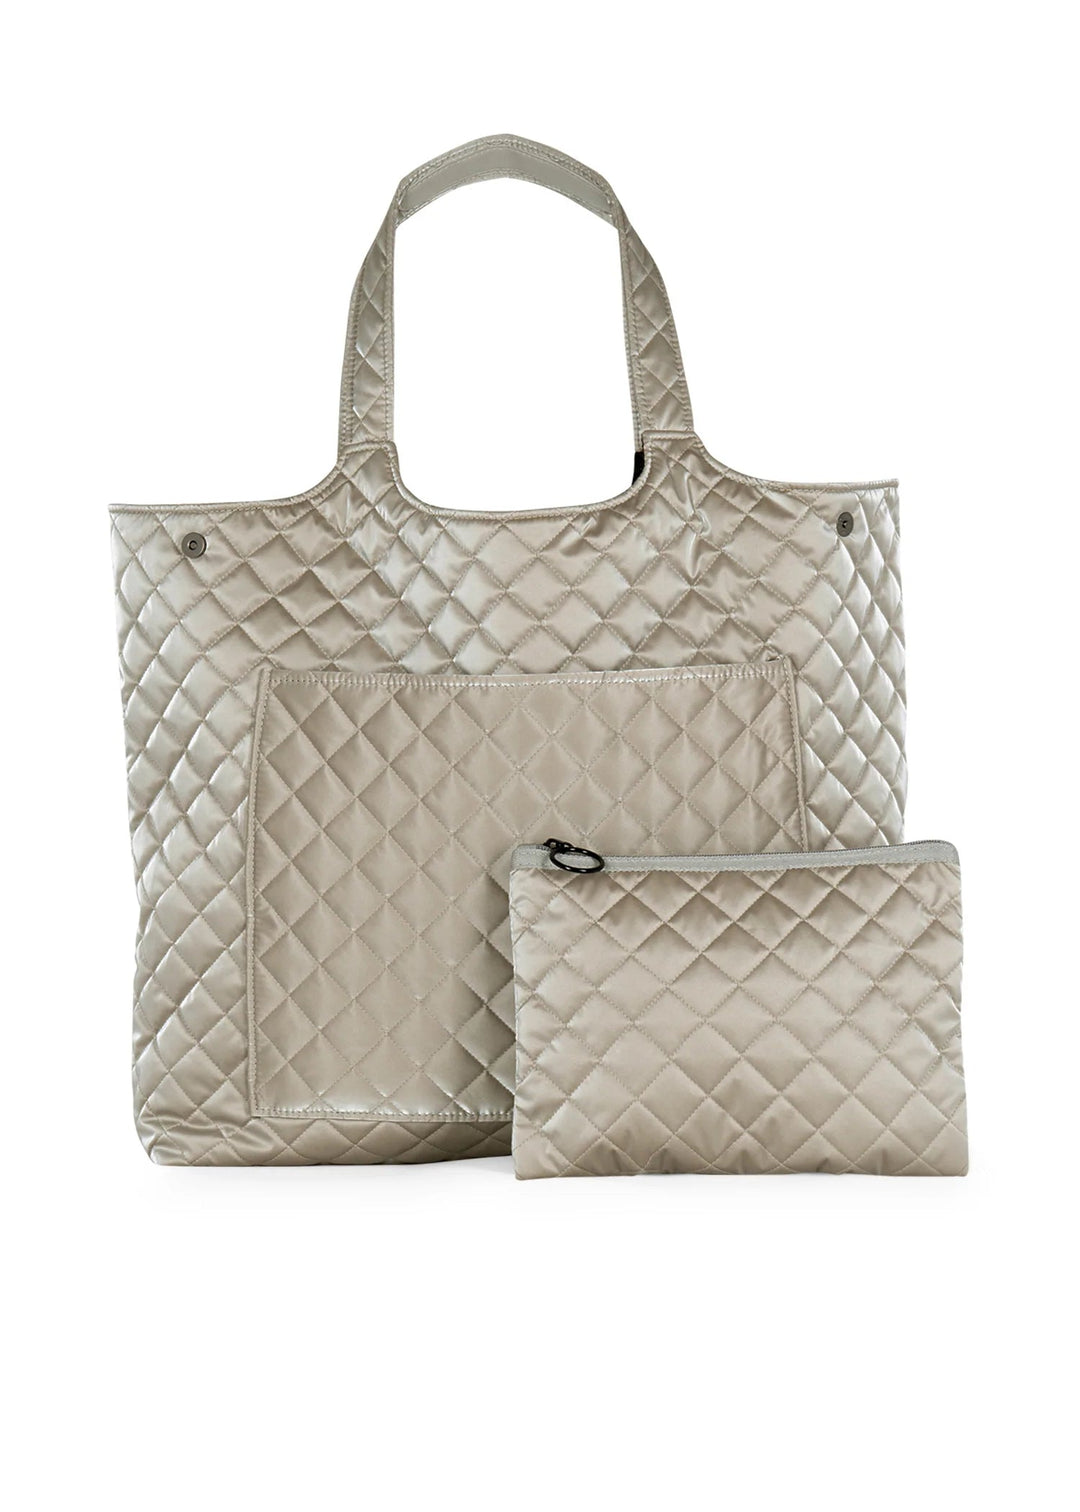 Haute Shore Large Griege Quilted Puffer Beach, Pool or Everyday Tote